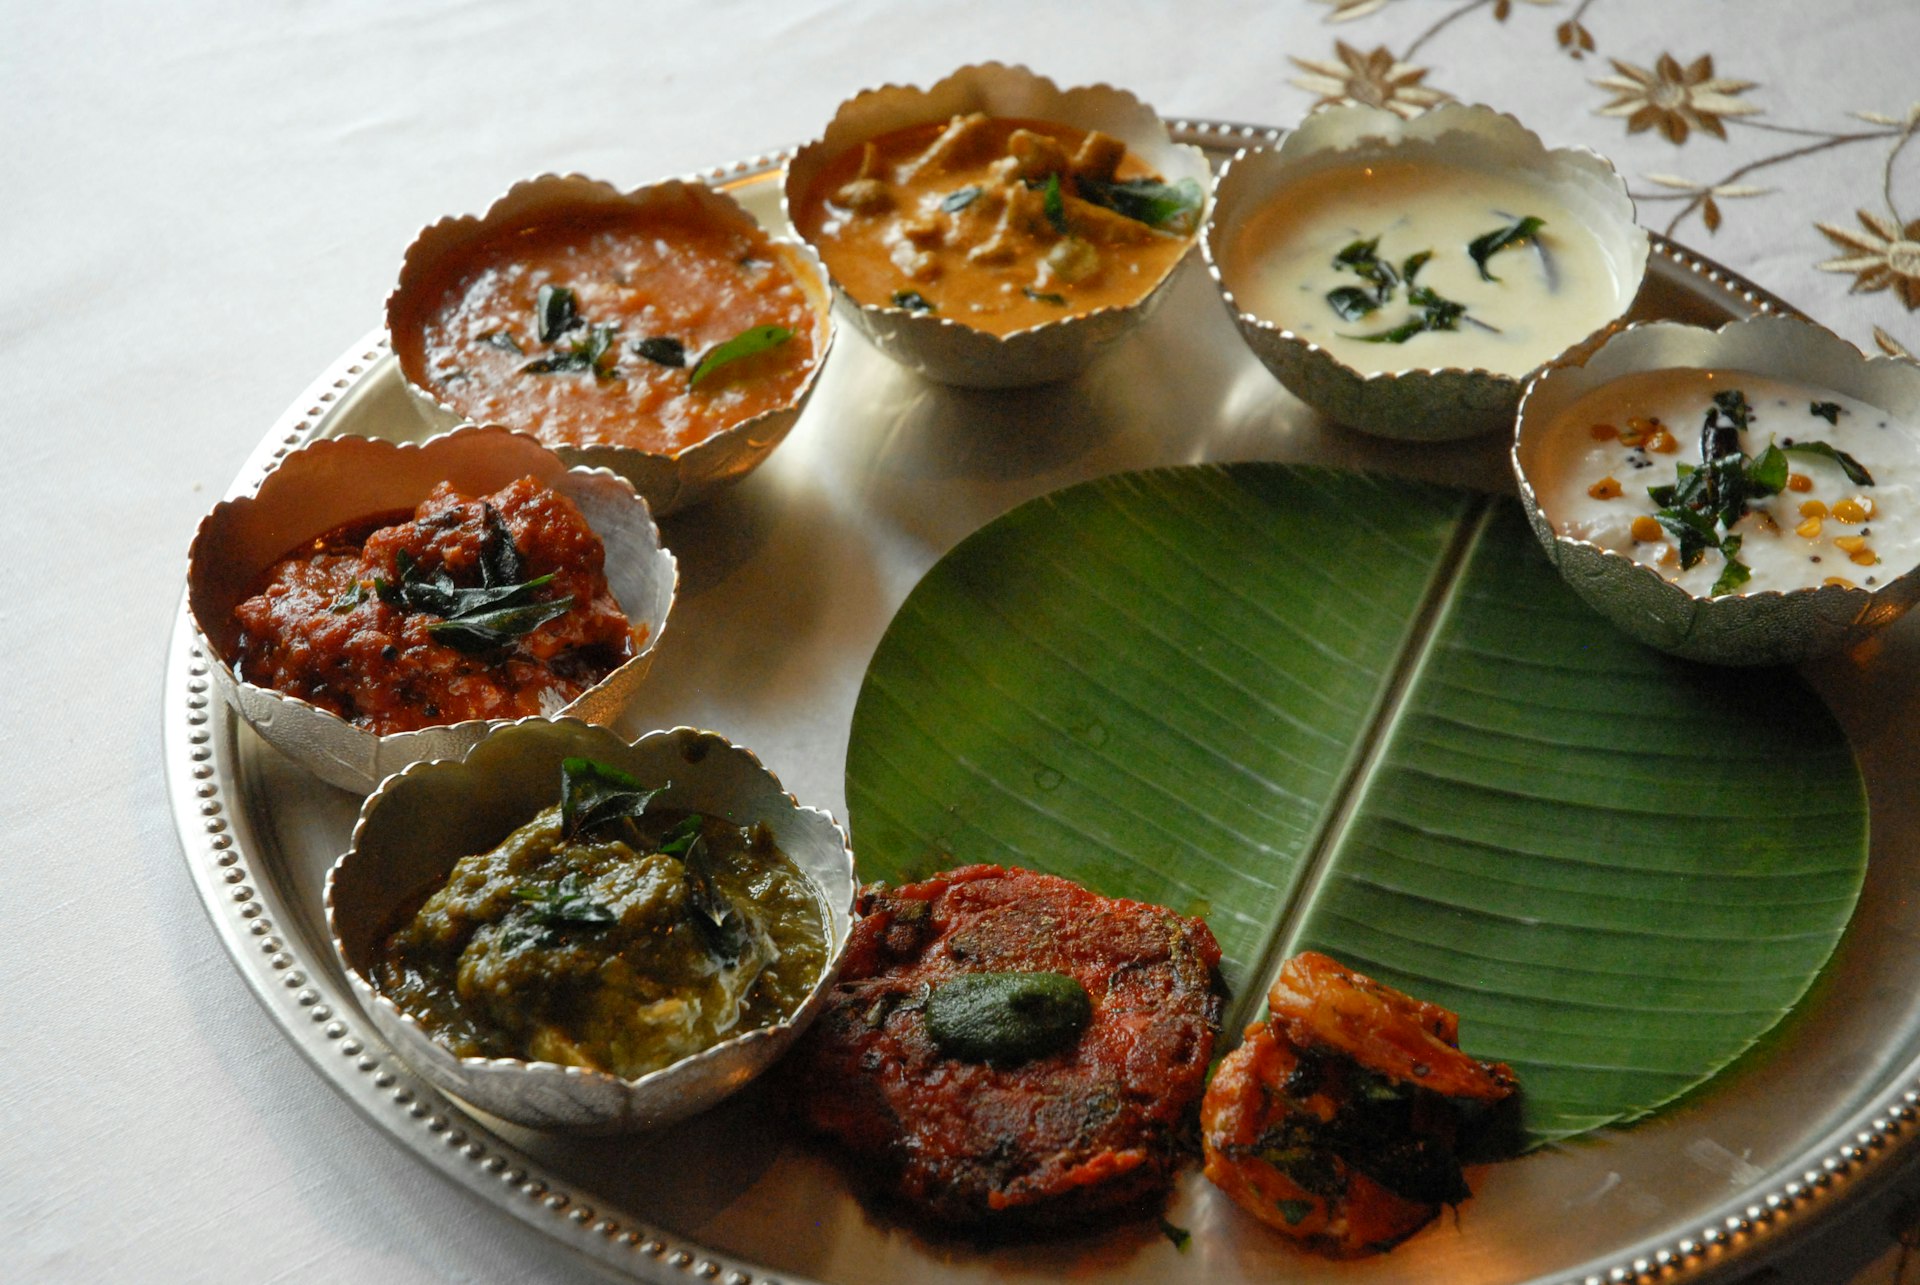 An Hyderbadi thali (plate meal) on a silver platter